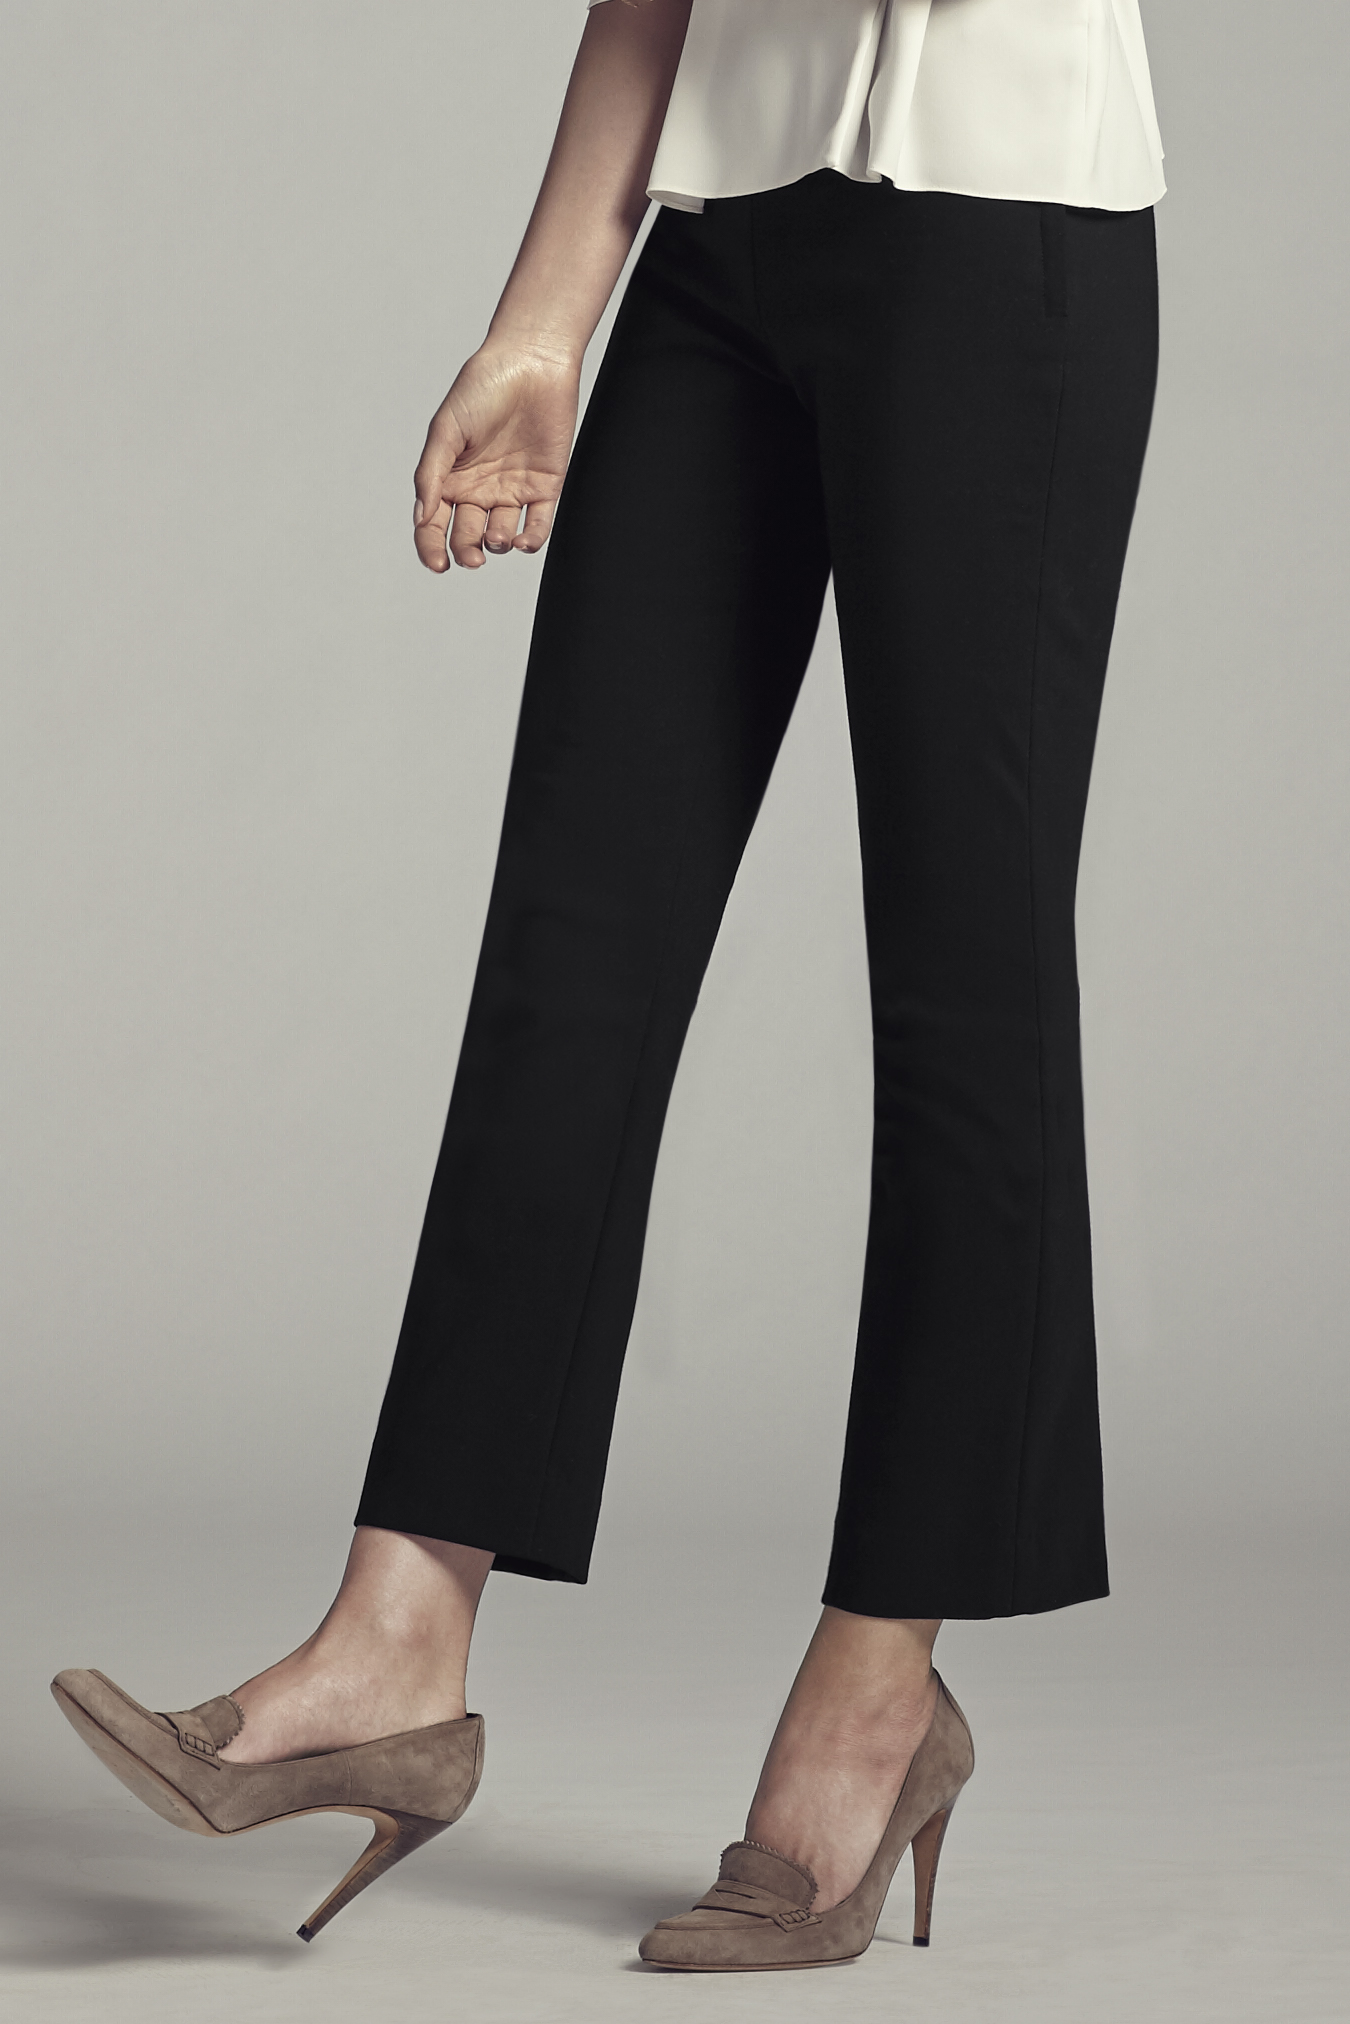 work pants for different body types - petite